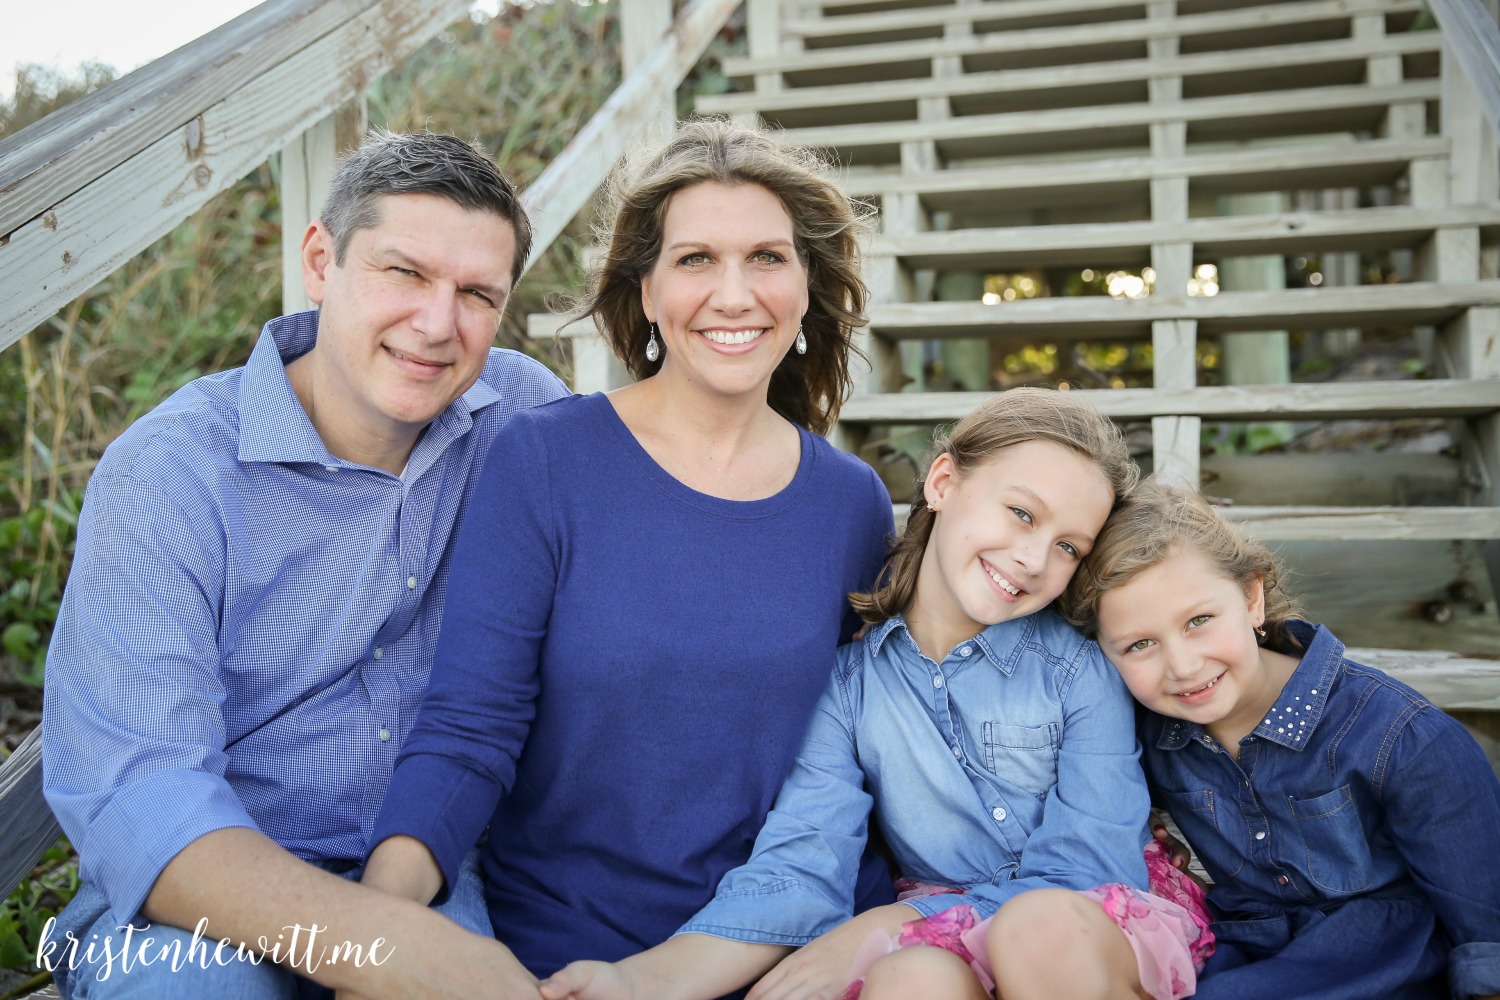 8 Tips to Choose the Best Outfits for Family Pictures Without Going Broke -  Kristen Hewitt